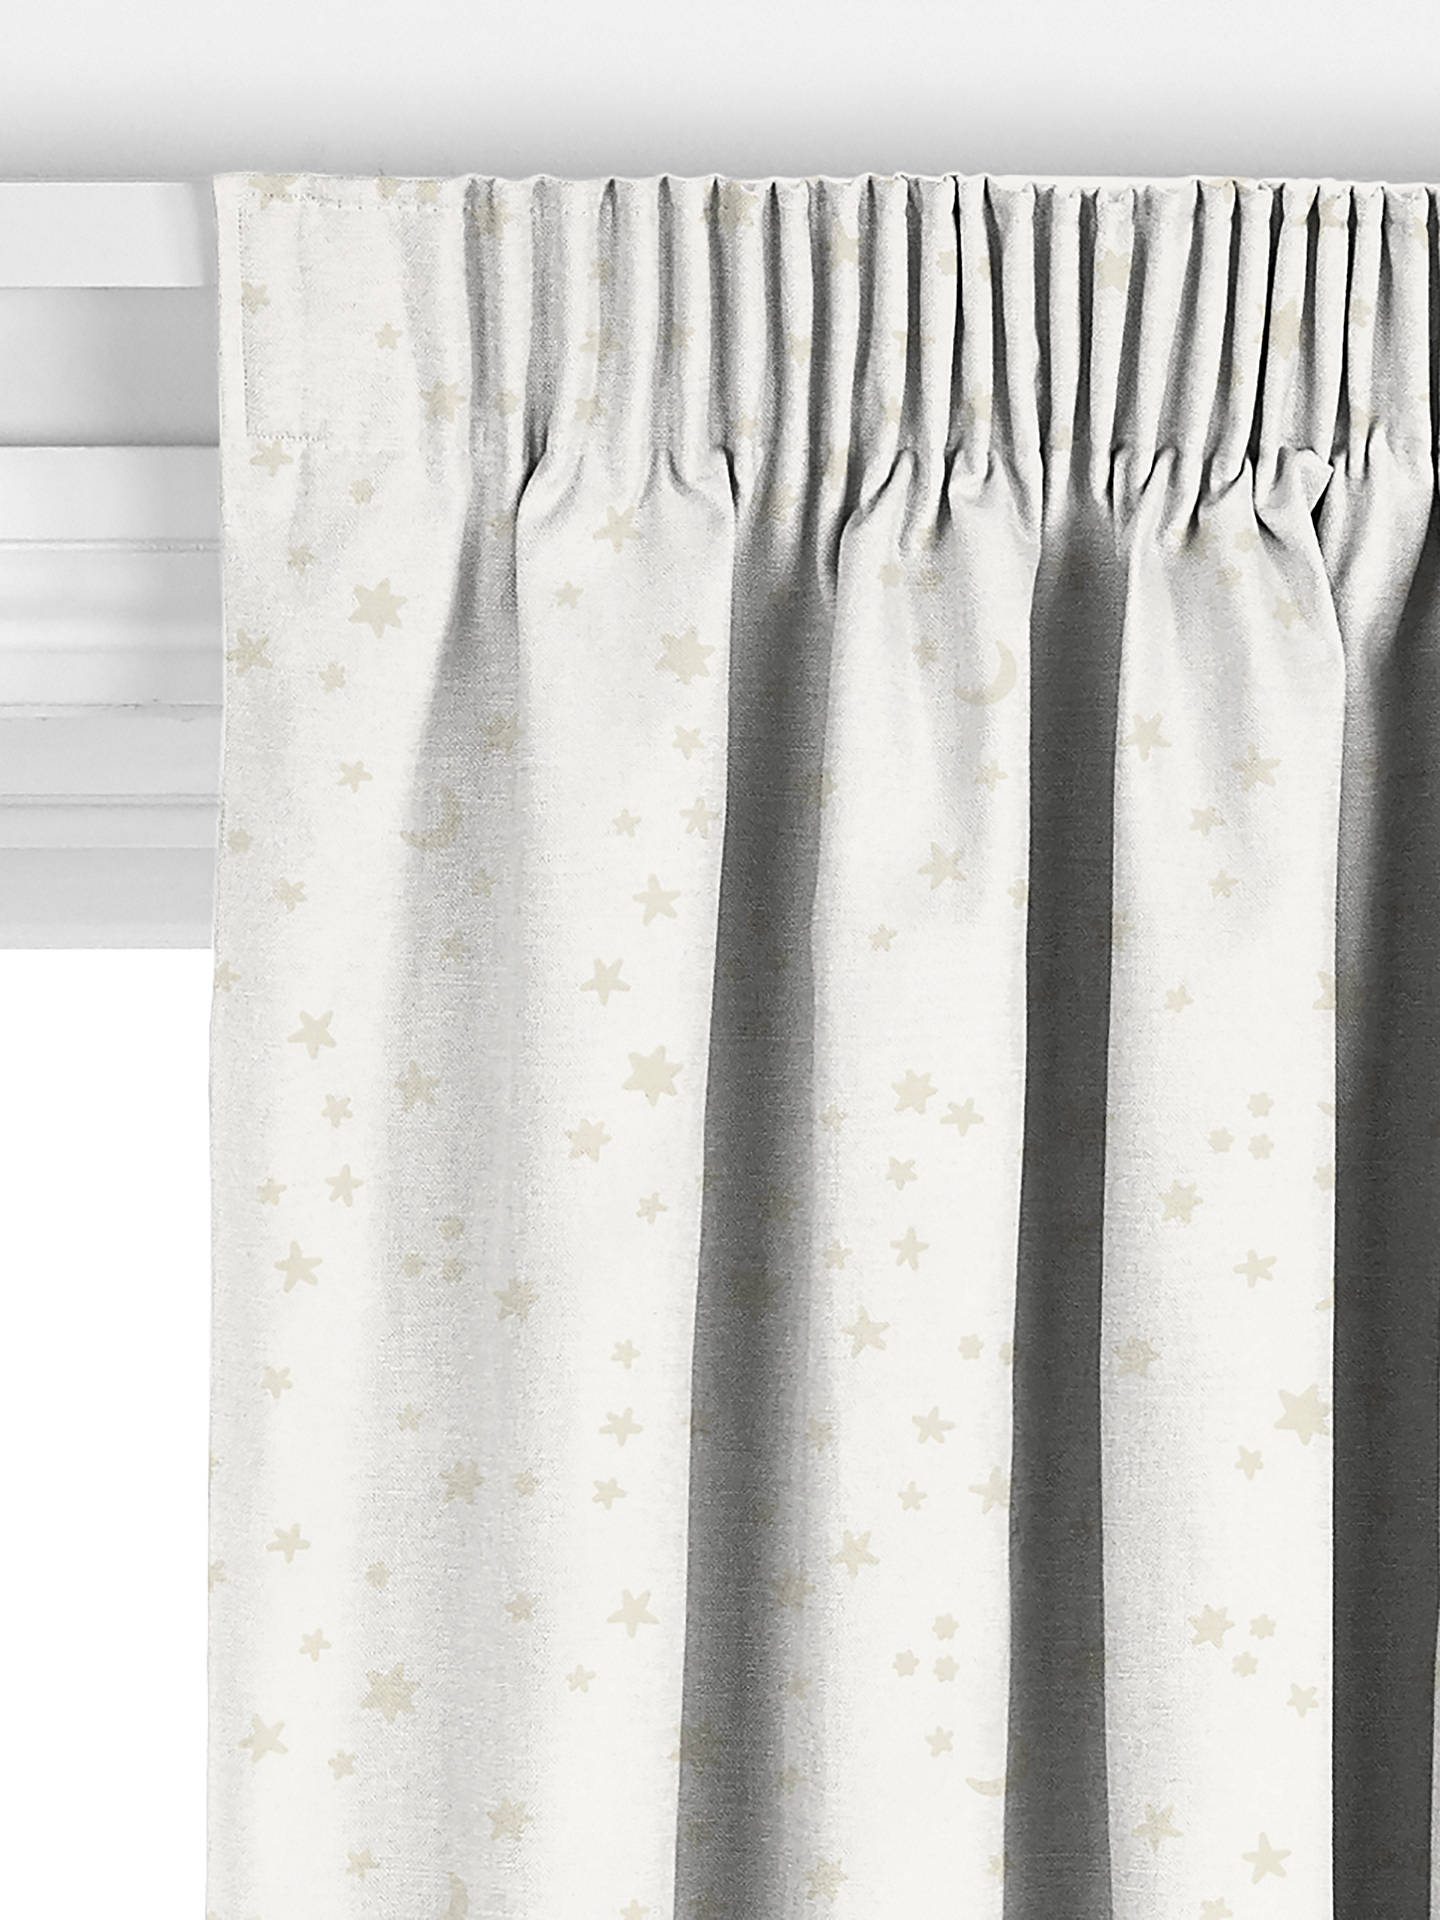 John Lewis Starry Sky Made to Measure Curtains, Marshmallow